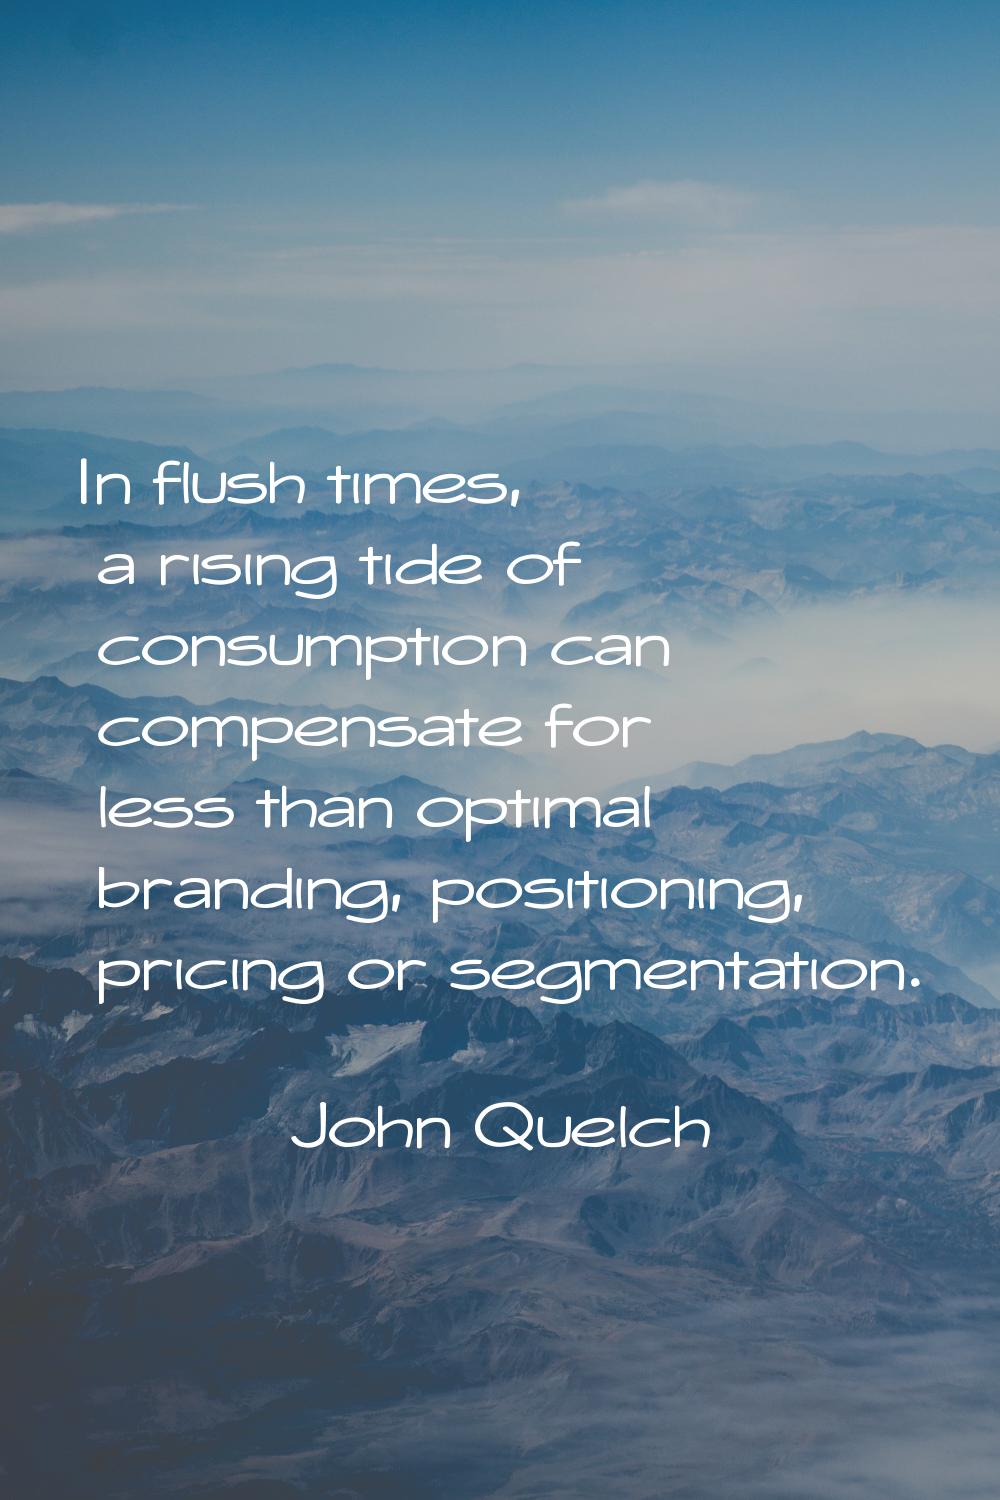 In flush times, a rising tide of consumption can compensate for less than optimal branding, positio